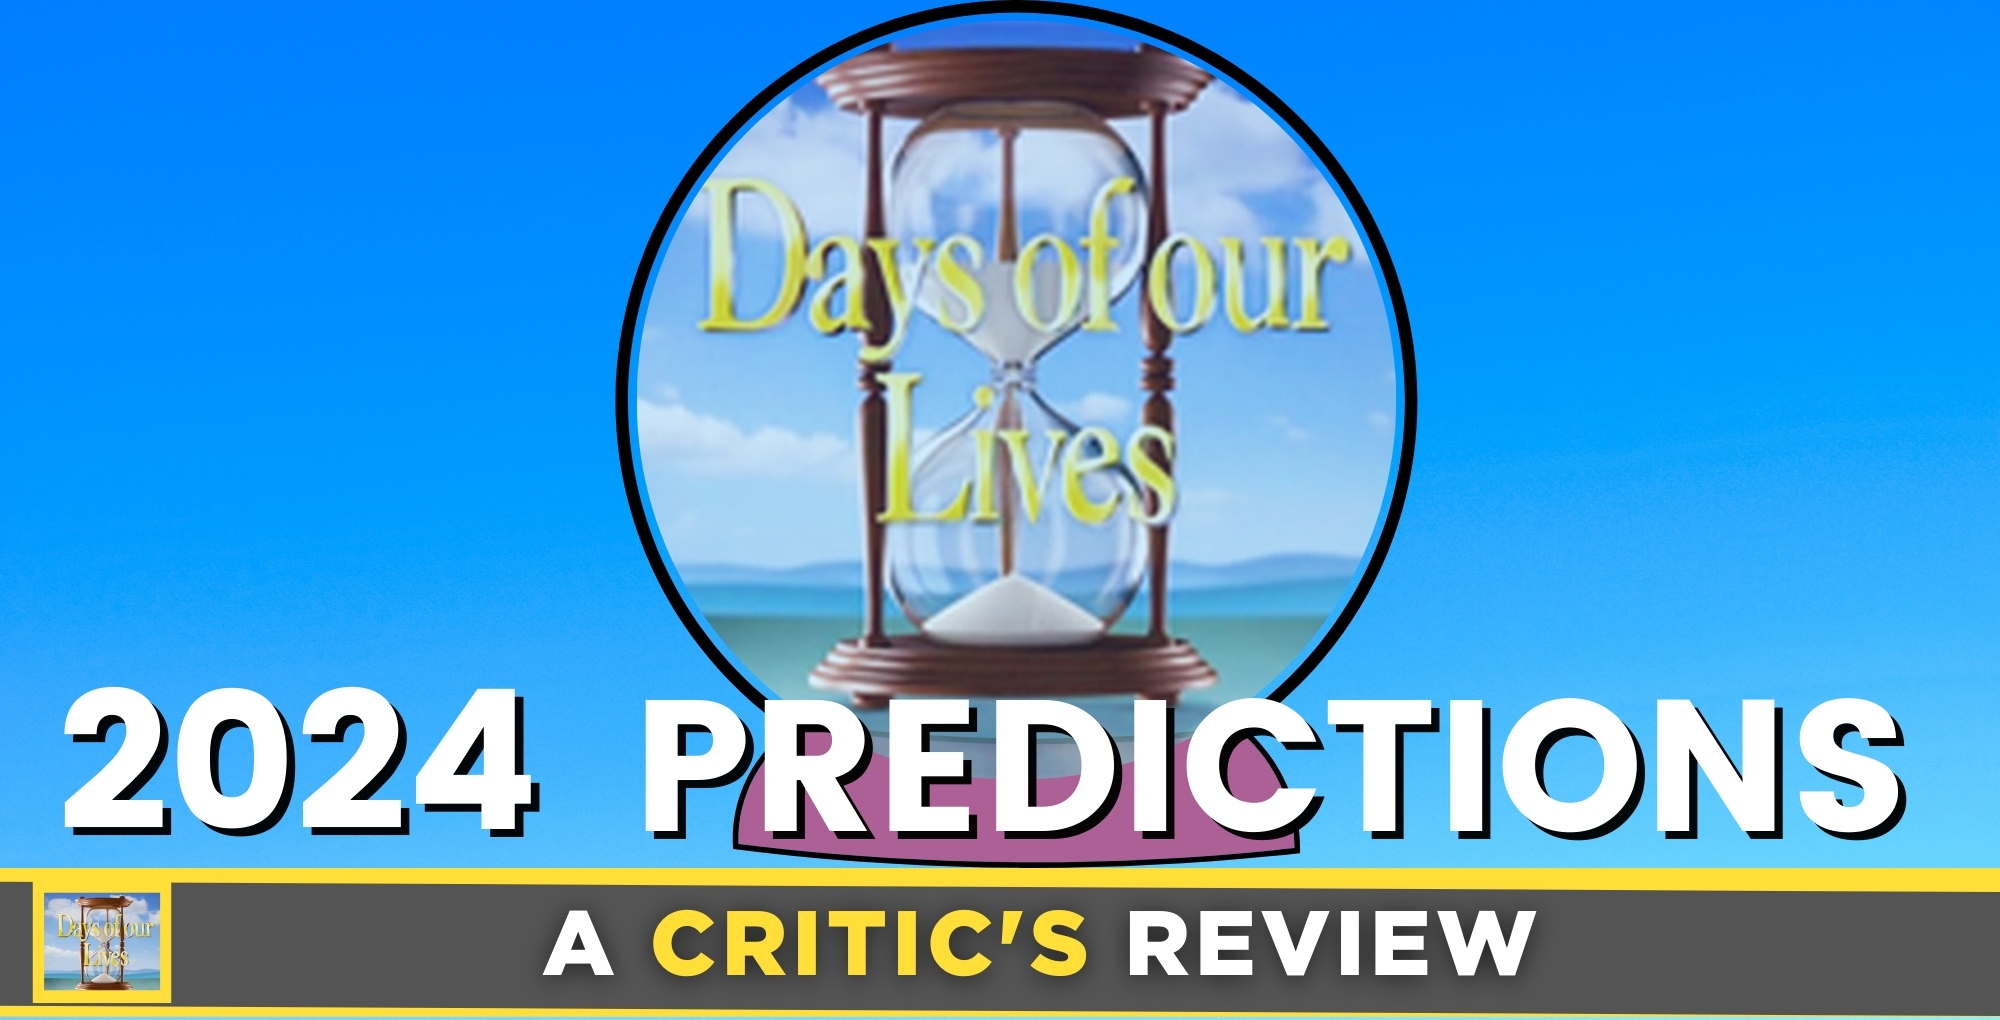 A Critic’s Review of Days of our Lives A Roundup Of Predictions For 2024